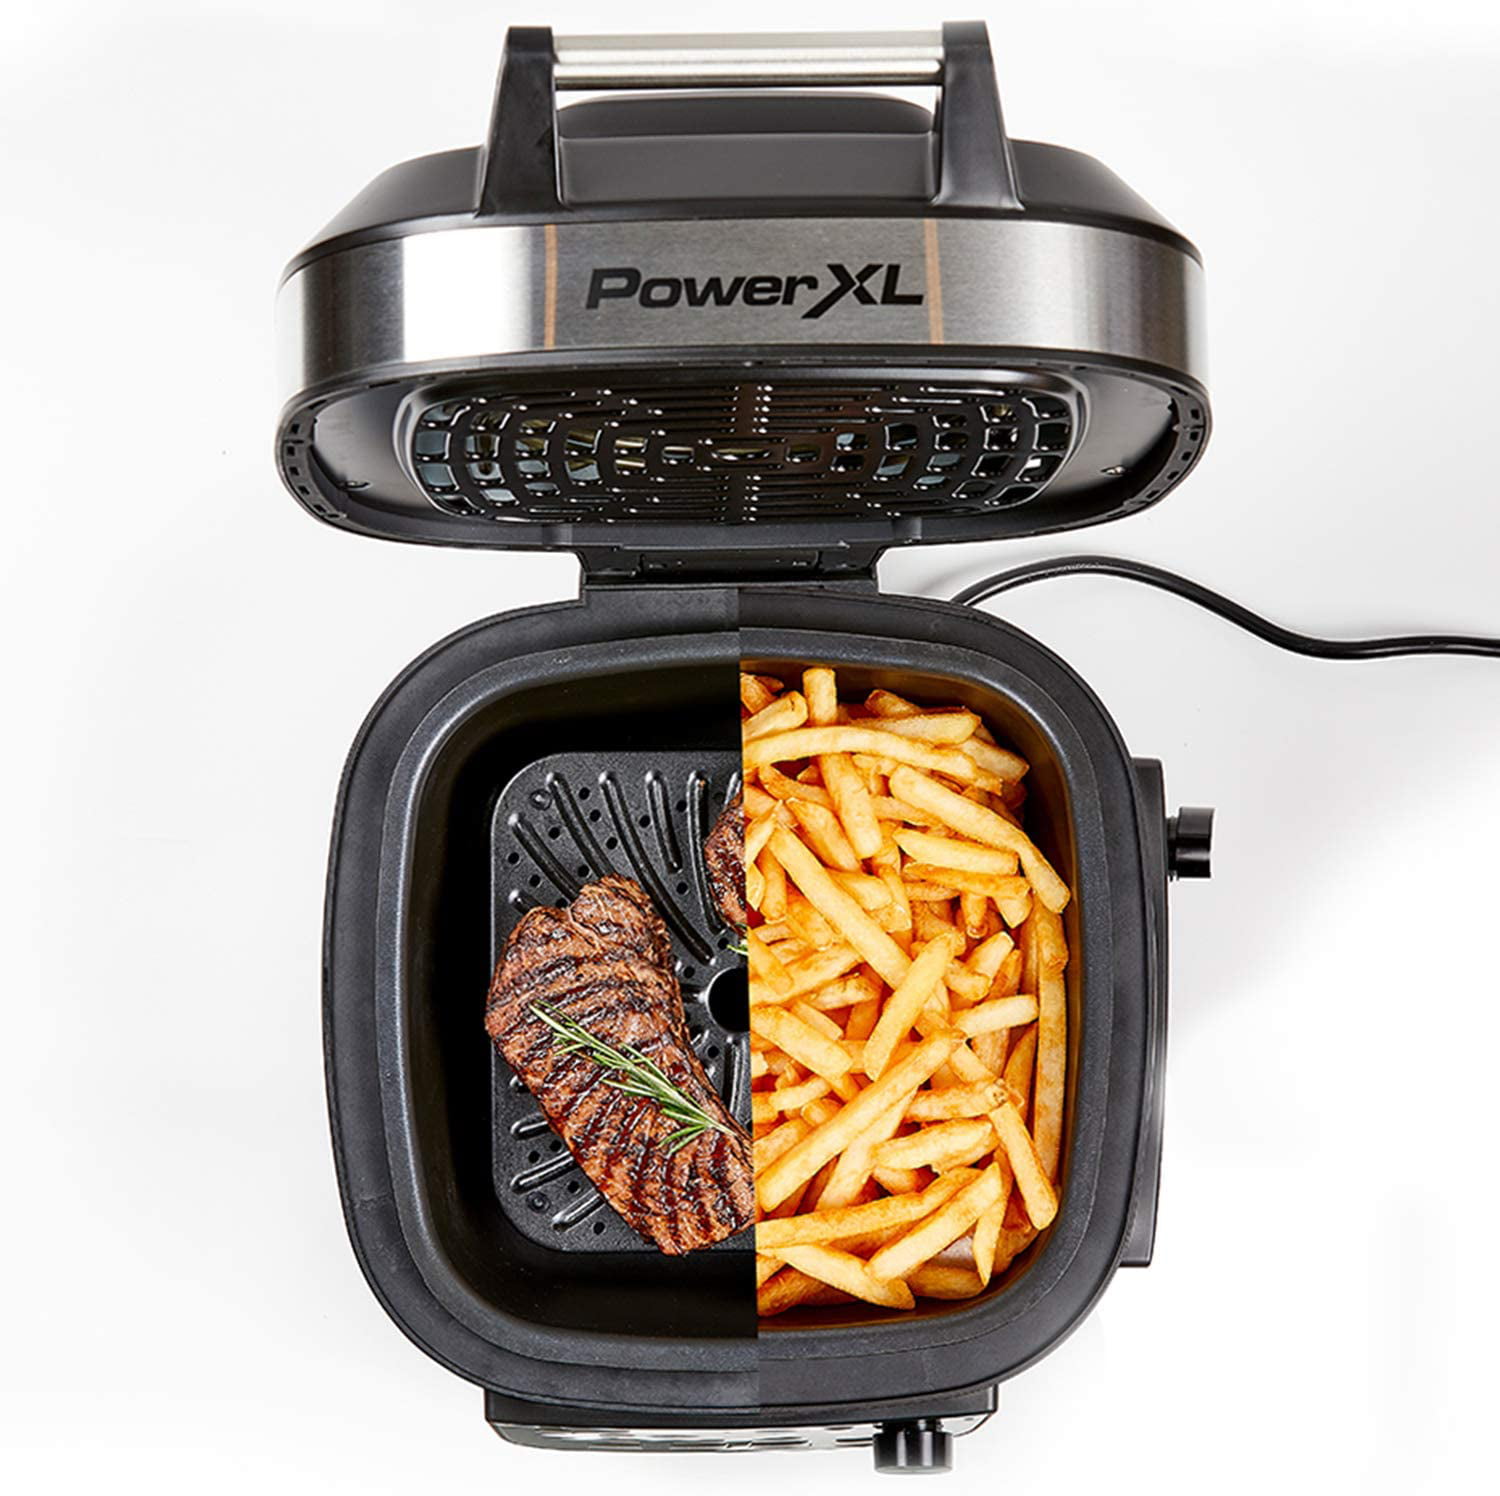 PowerXL 1550W 6-qt 12-in-1 Grill Air Fryer Combo with Glass Lid on QVC 